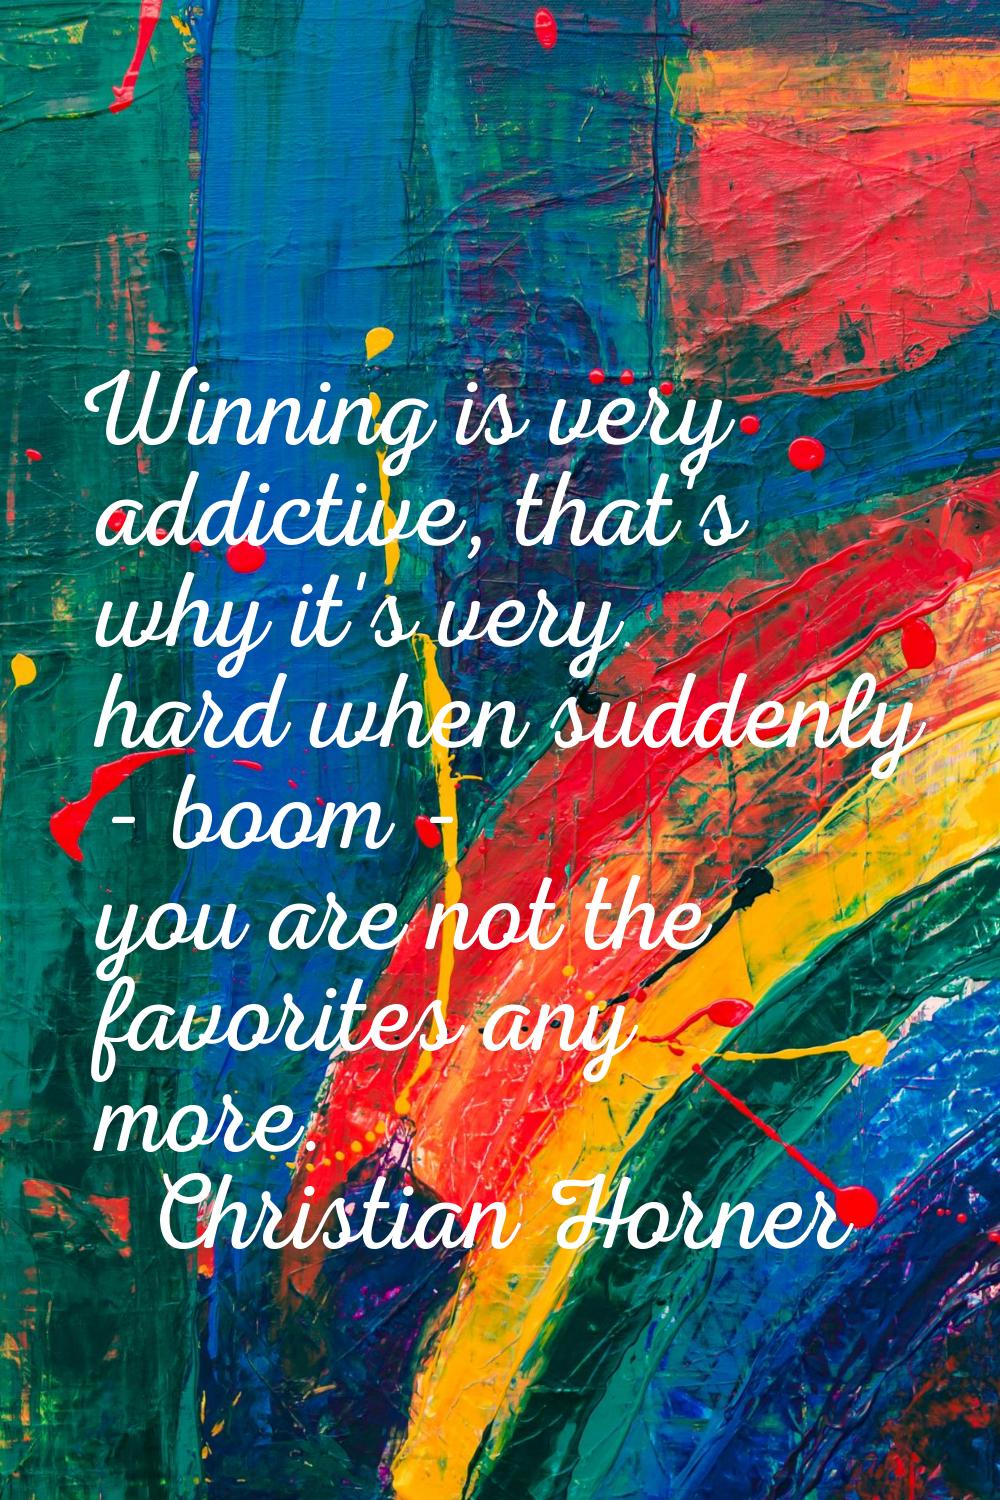 Winning is very addictive, that's why it's very hard when suddenly - boom - you are not the favorit